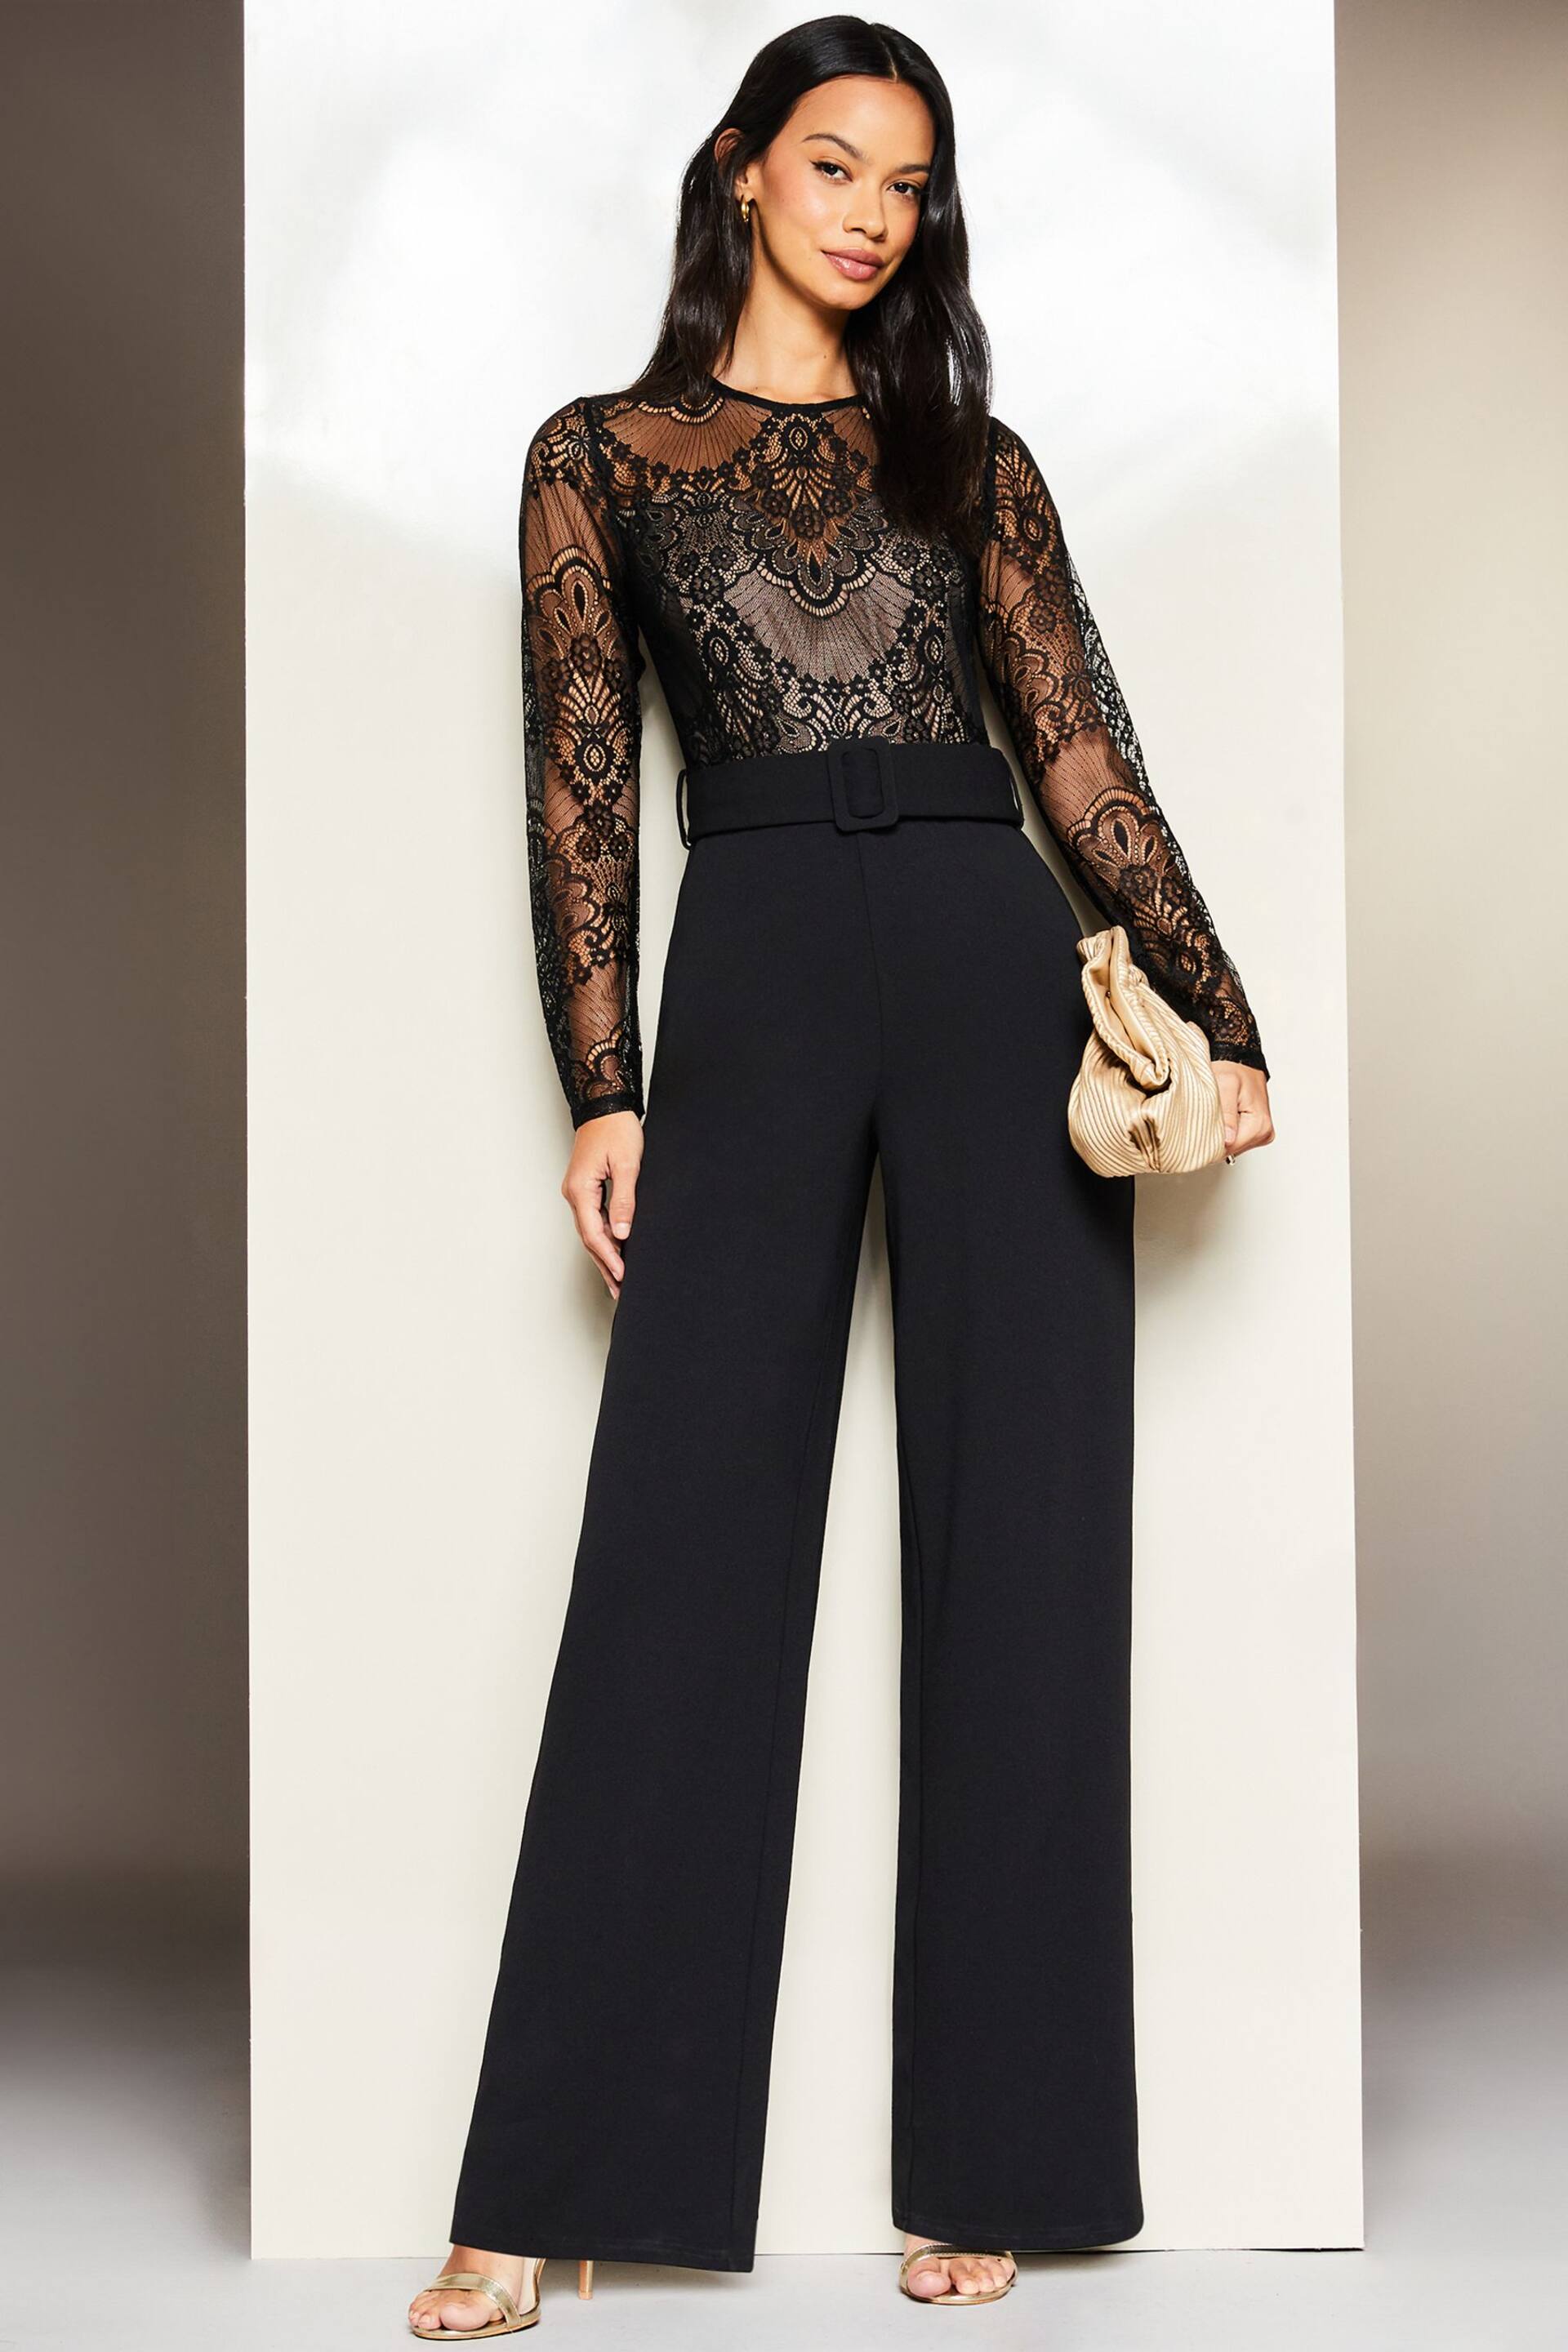 Lipsy Black Petite Wide Leg Long Sleeve Lace Sweetheart Belted Jumpsuit - Image 1 of 4